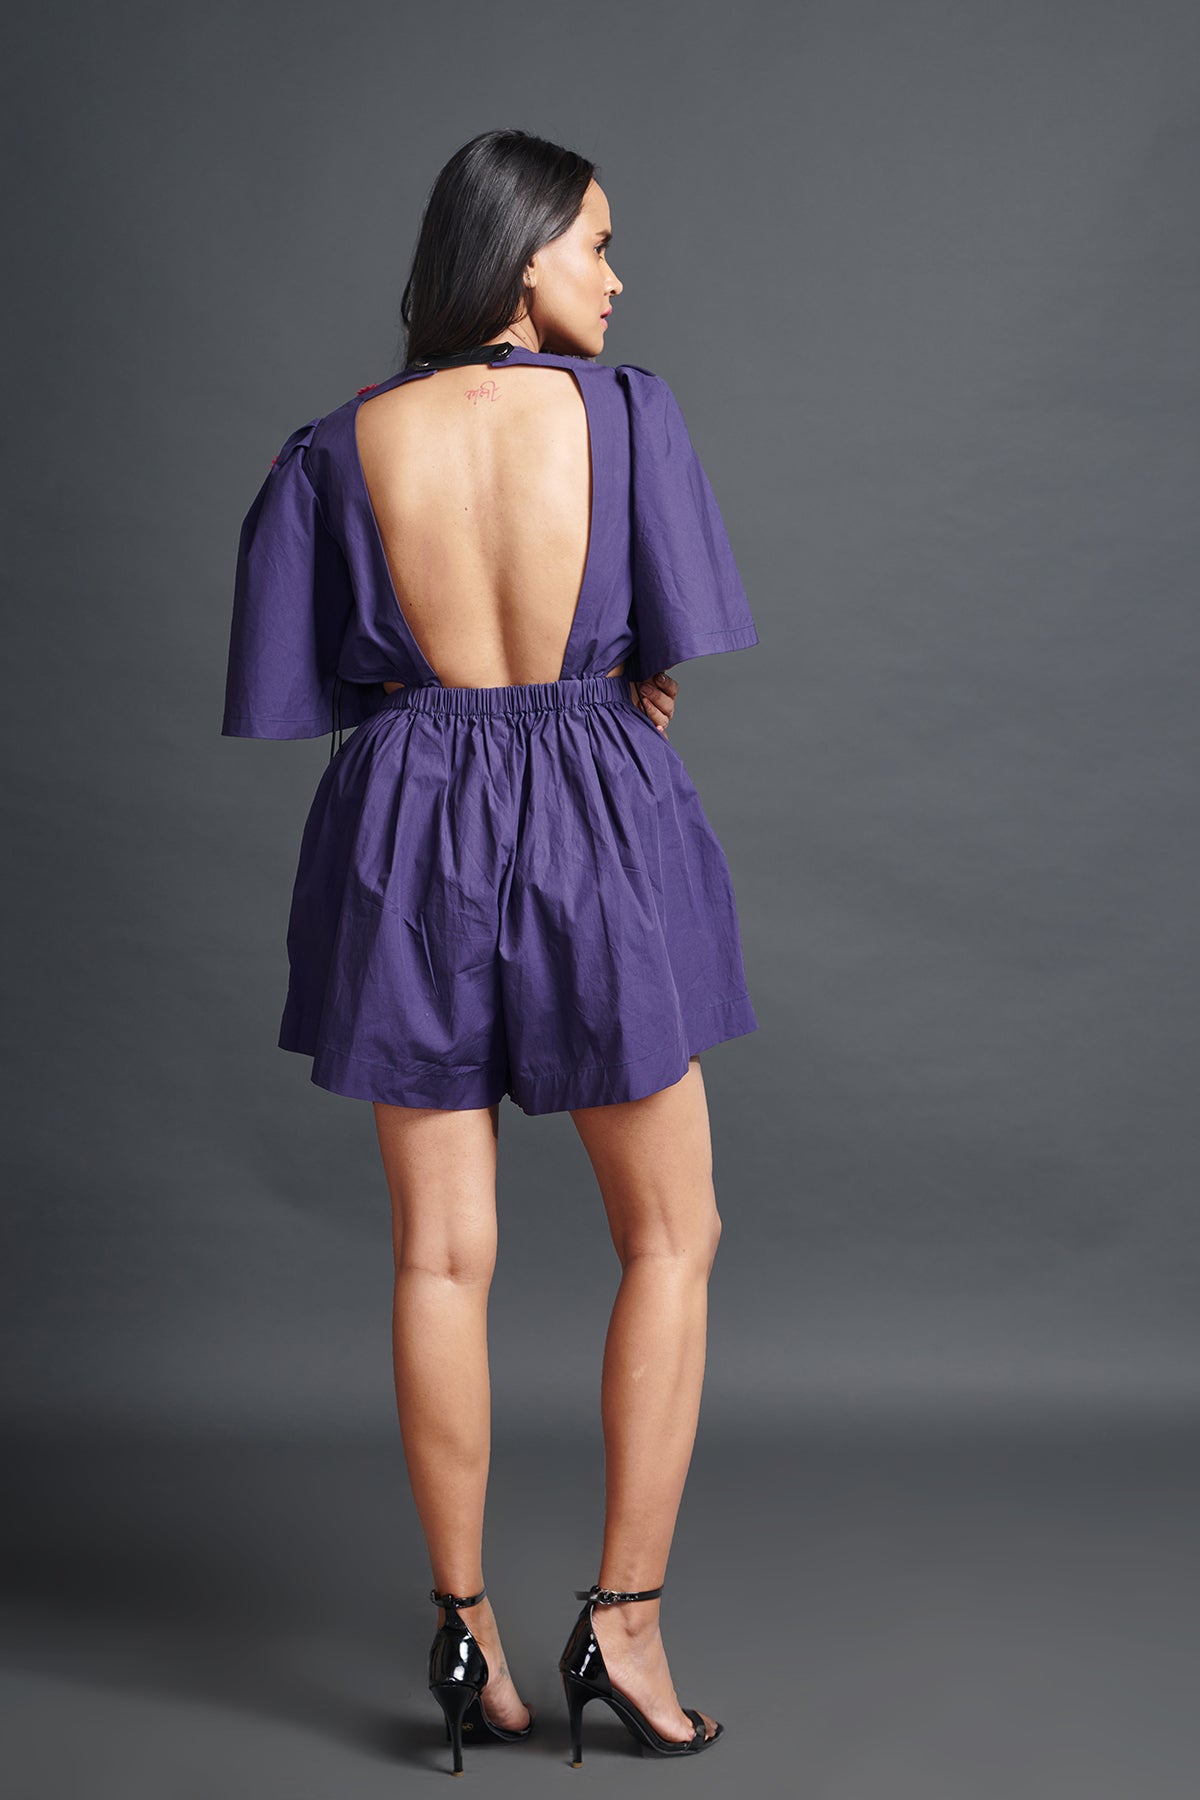 Image of PURPLE PLAYSUIT IN COTTON BASE WITH CUTWORK EMBROIDERY AND BACKLESS SIDE CUT-OUT DETAIL. From savoirfashions.com